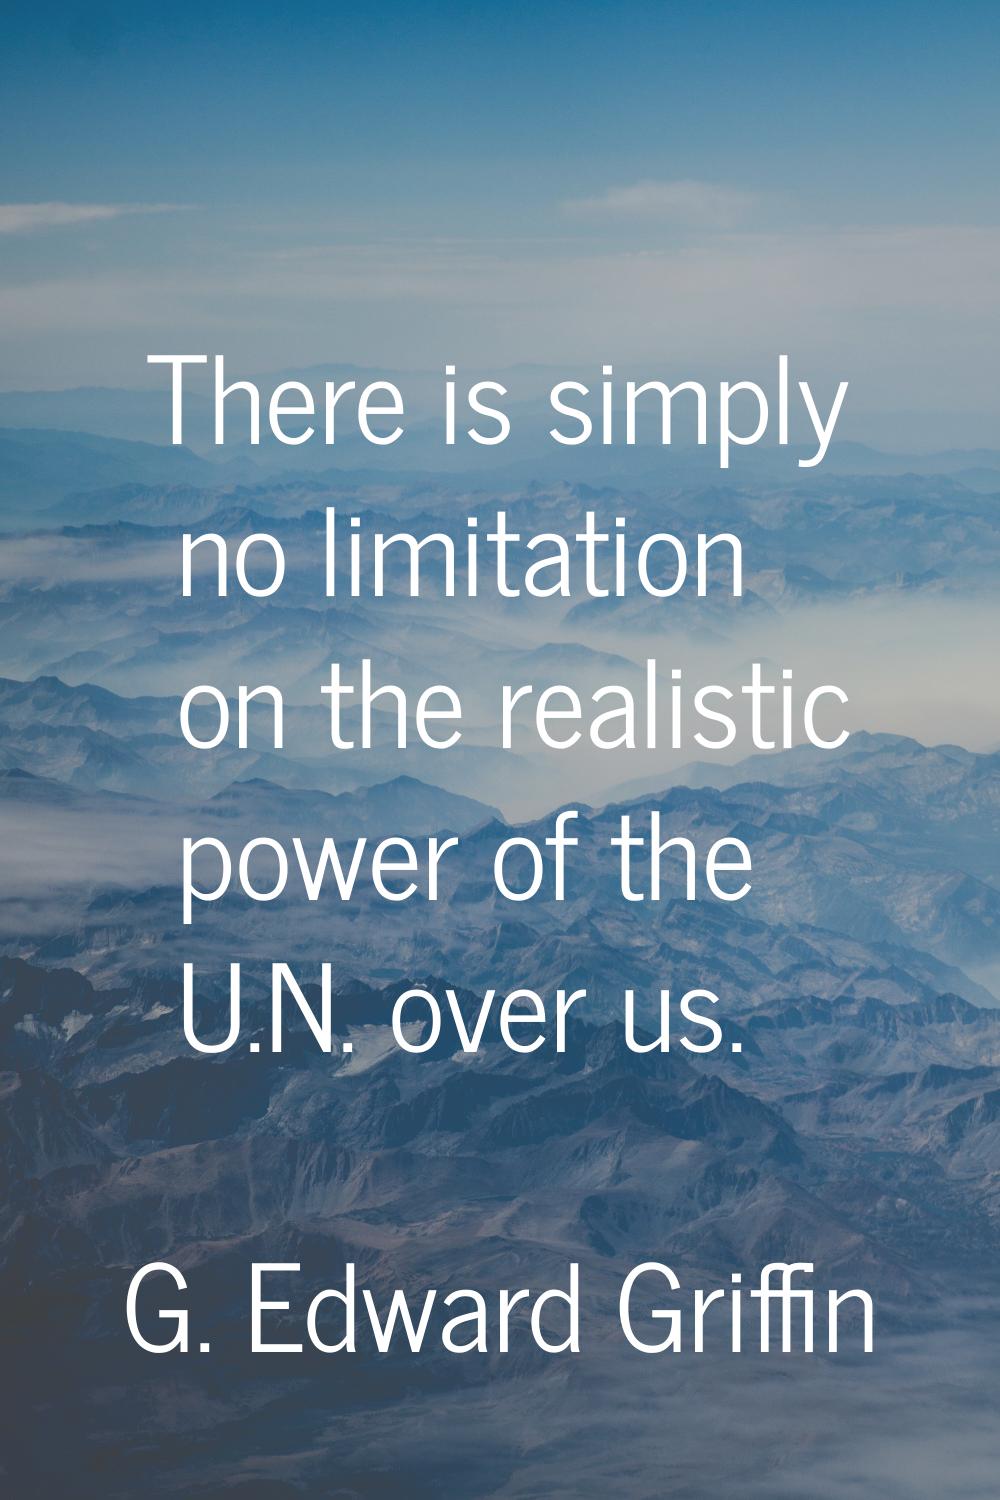 There is simply no limitation on the realistic power of the U.N. over us.